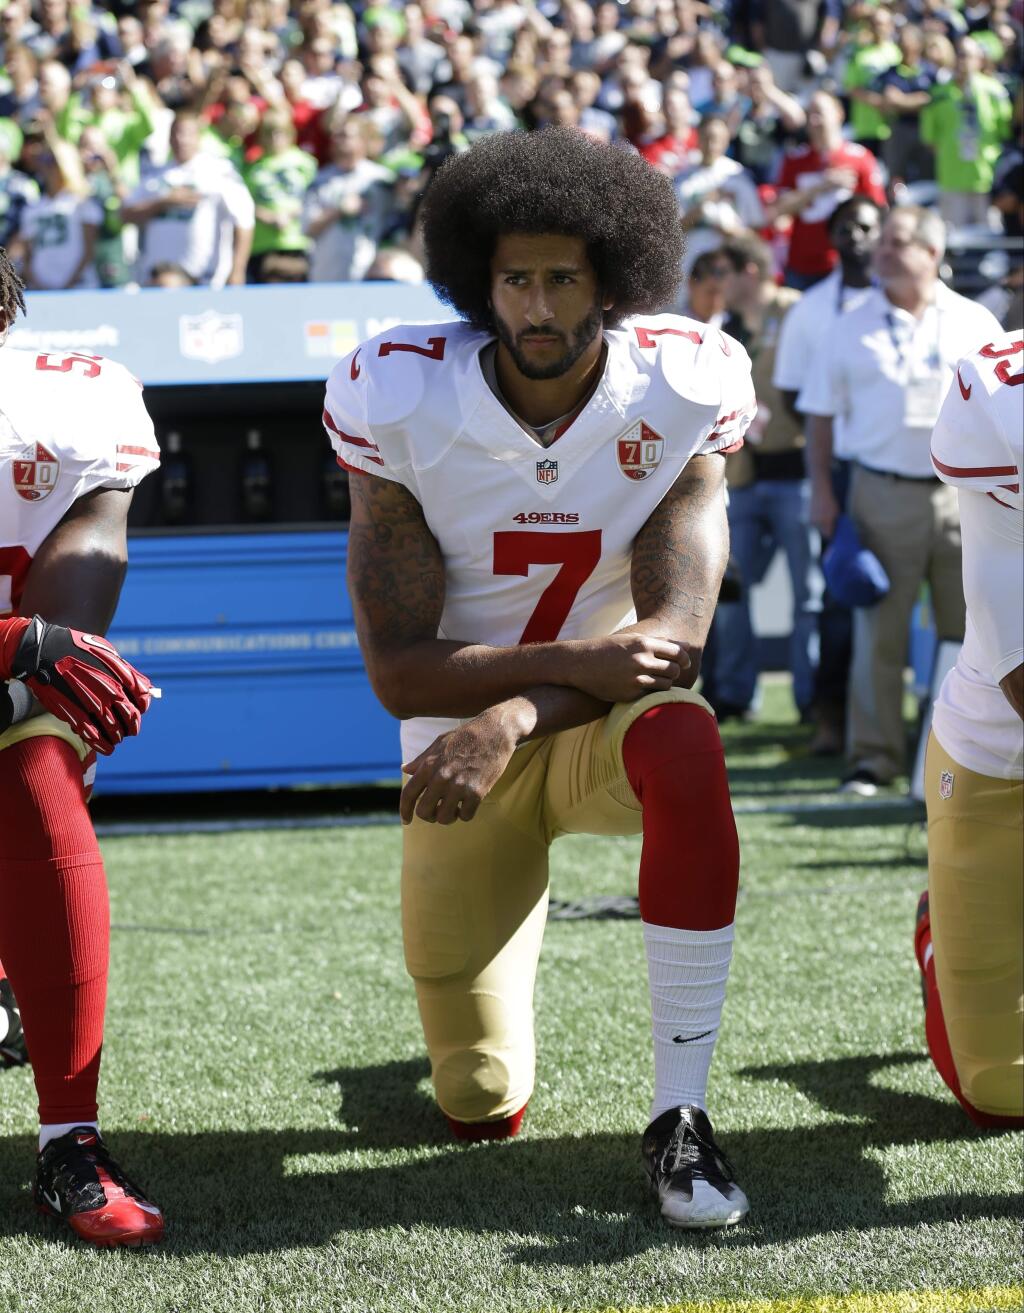 FILE - In this Sept. 25, 2016, file photo, San Francisco 49ers' Colin Kaepernick kneels during the national anthem before an NFL football game against the Seattle Seahawks, in Seattle. Kaepernick has a new deal with Nike, even though the NFL does not want him. Kaepernick's attorney, Mark Geragos, made the announcement on Twitter, calling the former 49ers quarterback an “All American Icon” and crediting attorney Ben Meiselas for getting the deal done. (AP Photo/Ted S. Warren, File)